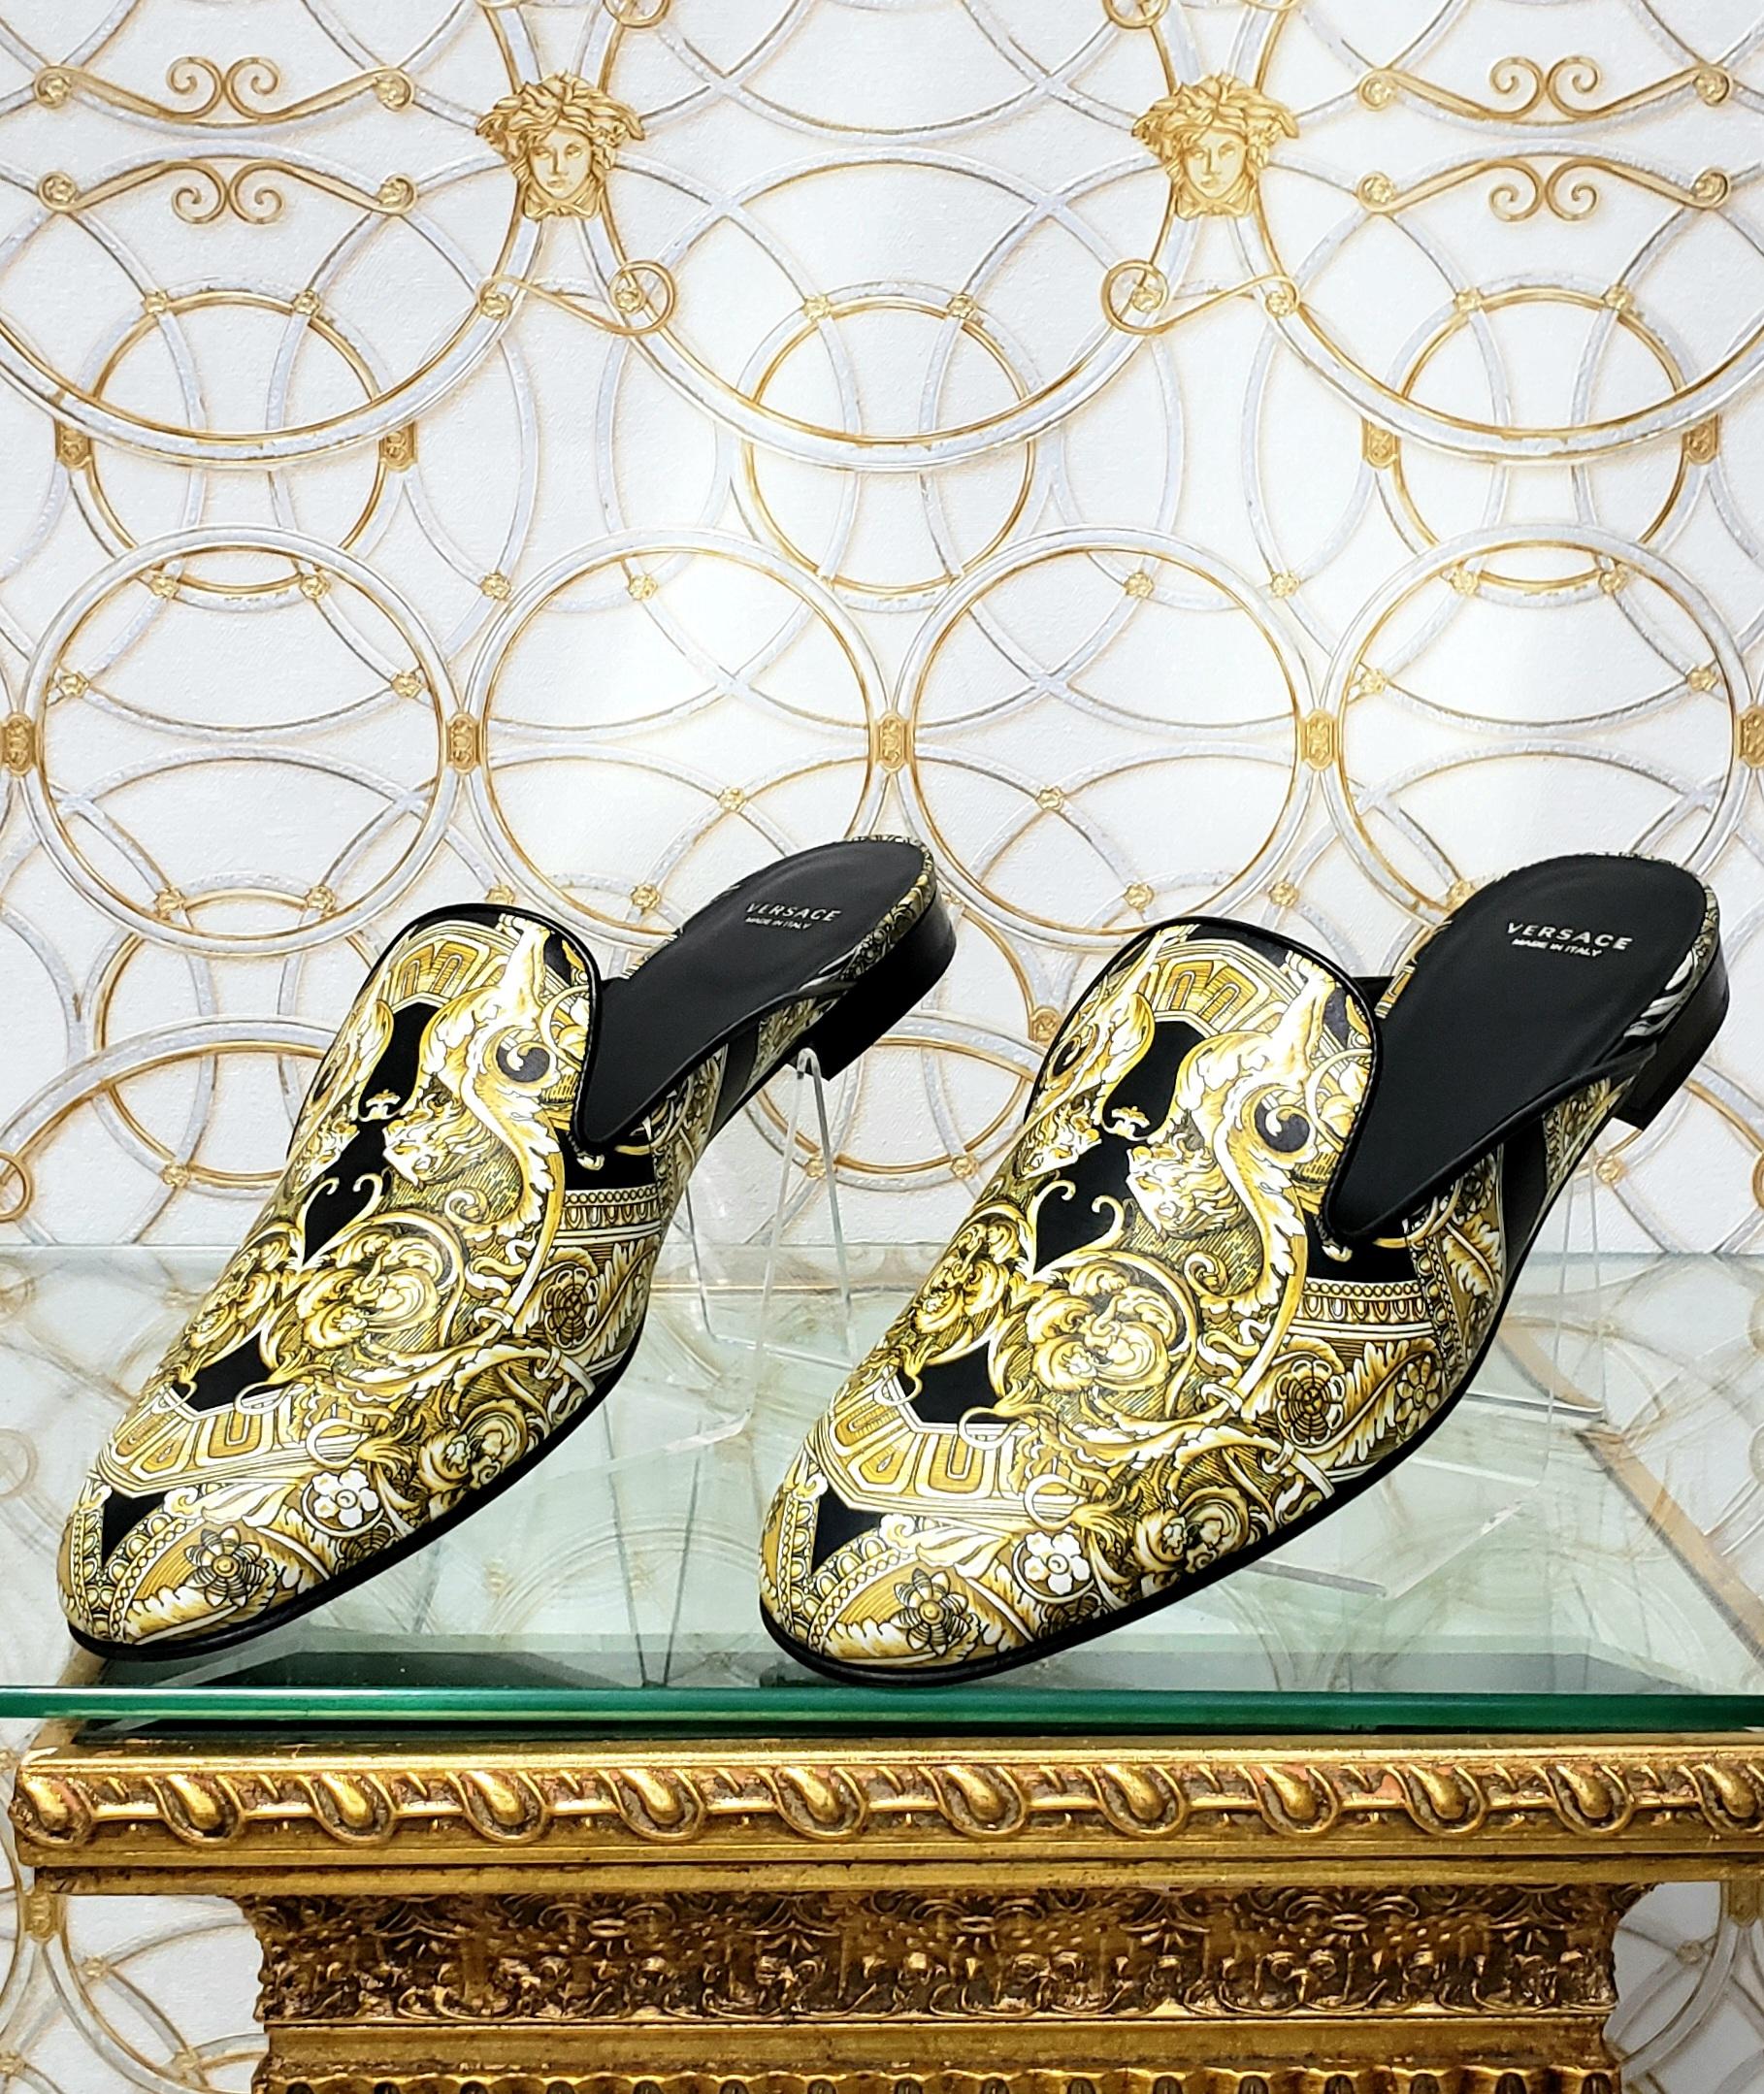 VERSACE 


Leather floral baroque mules 

 Color: Black and yellow
 Leather Sole


Size 36.5 - US 6.5 insole: 9 3/8